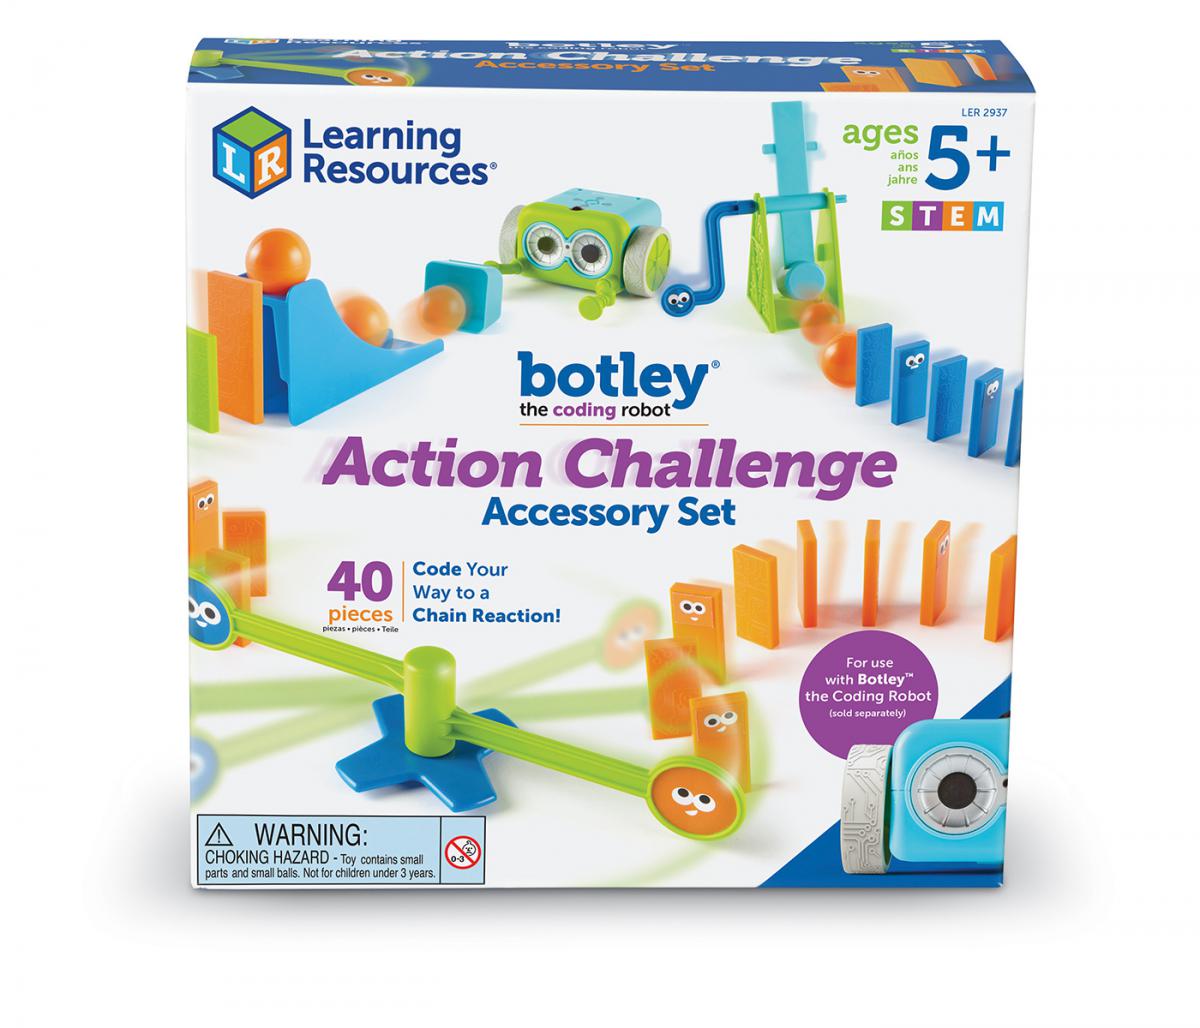  Botley the Coding Robot Action Challenge Accessory Set 